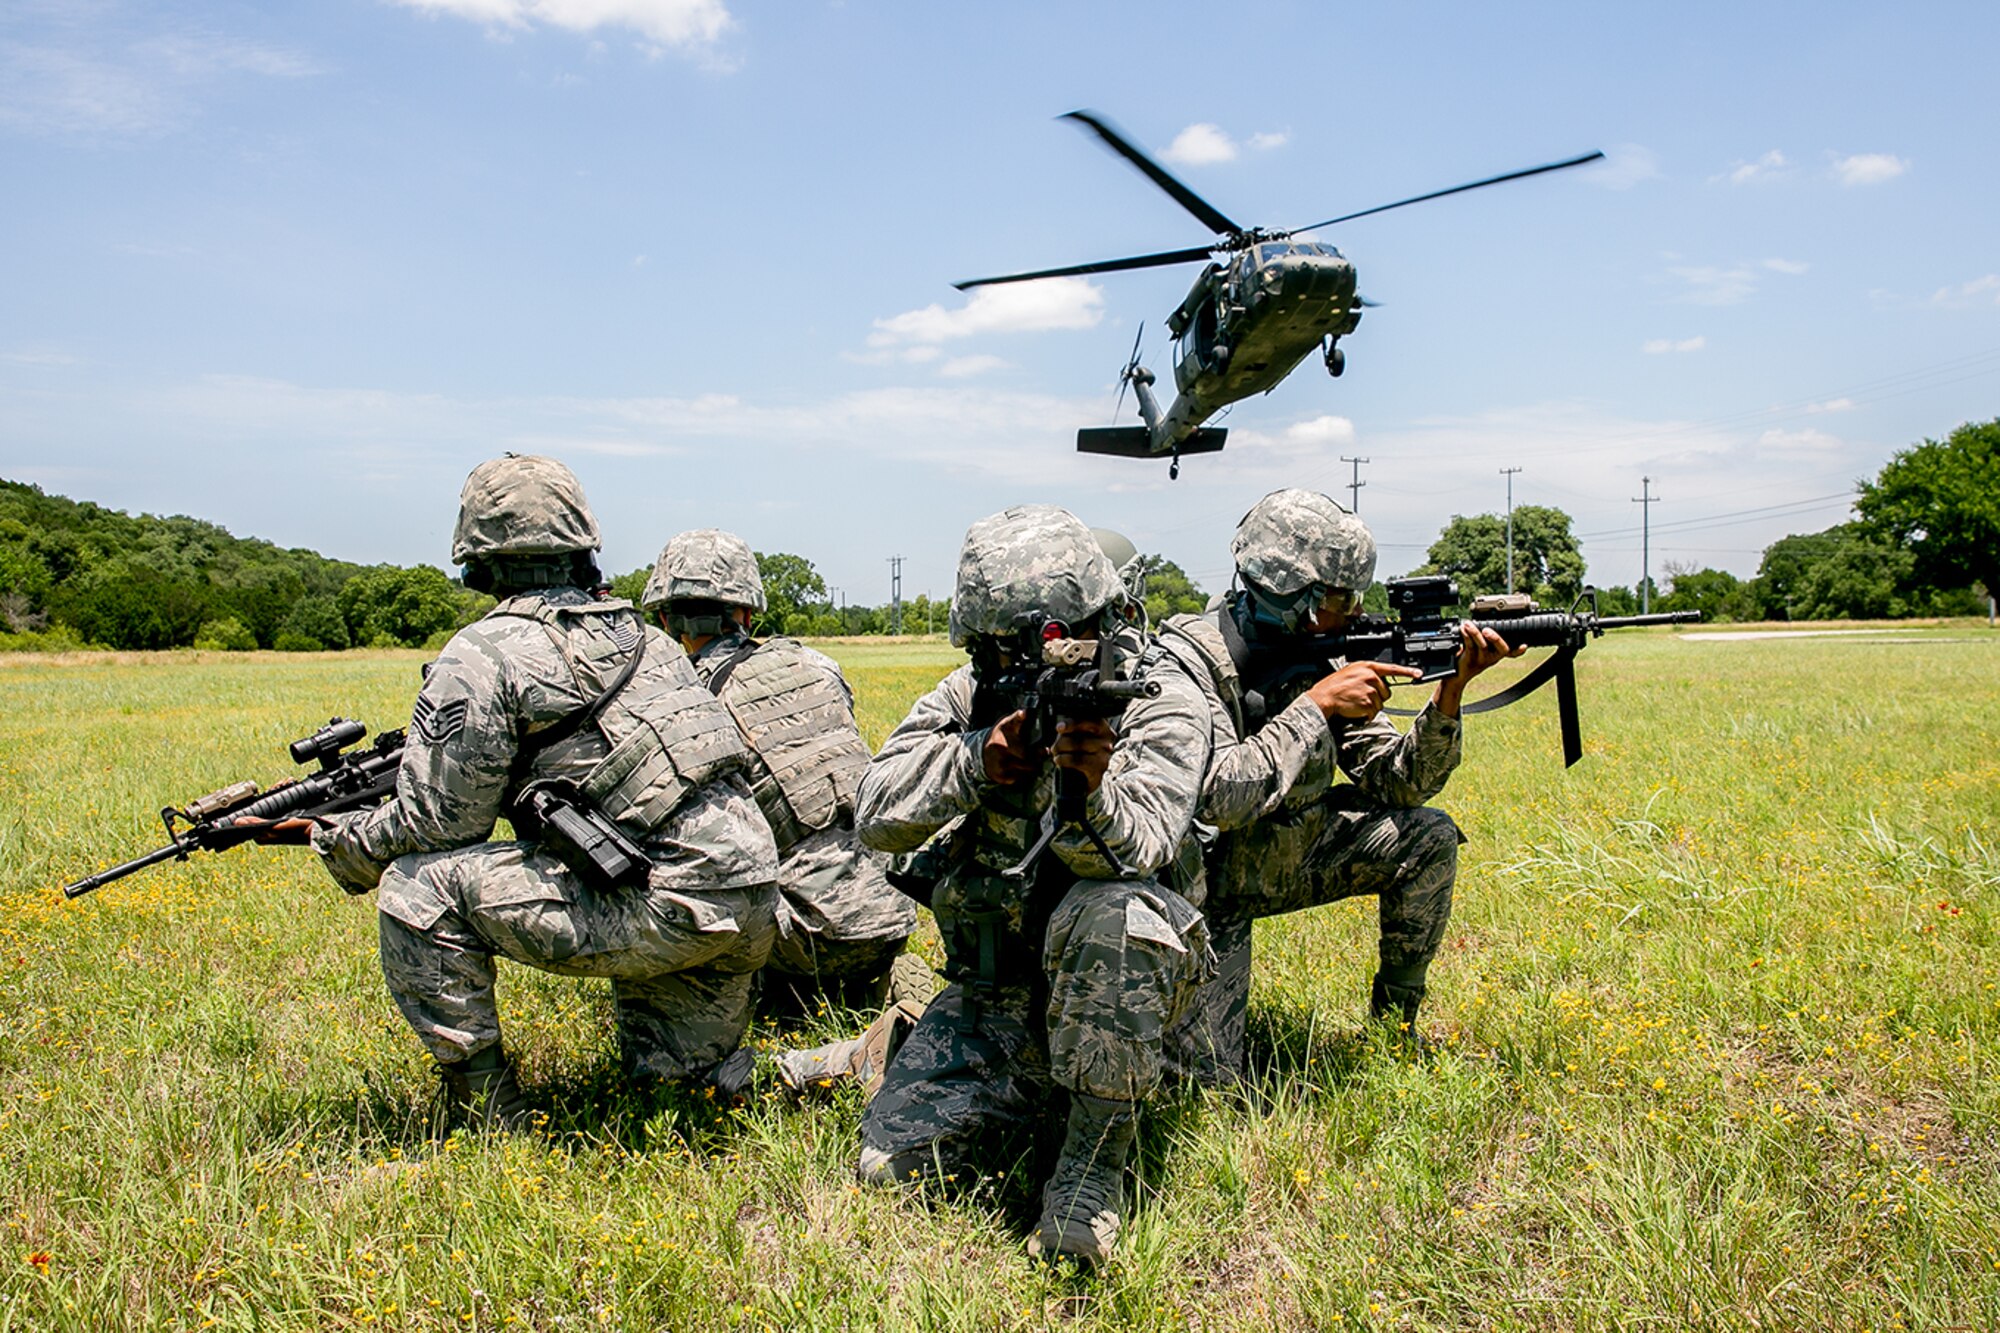 147th Security forces prepare to board a UH-60 Blackhawk